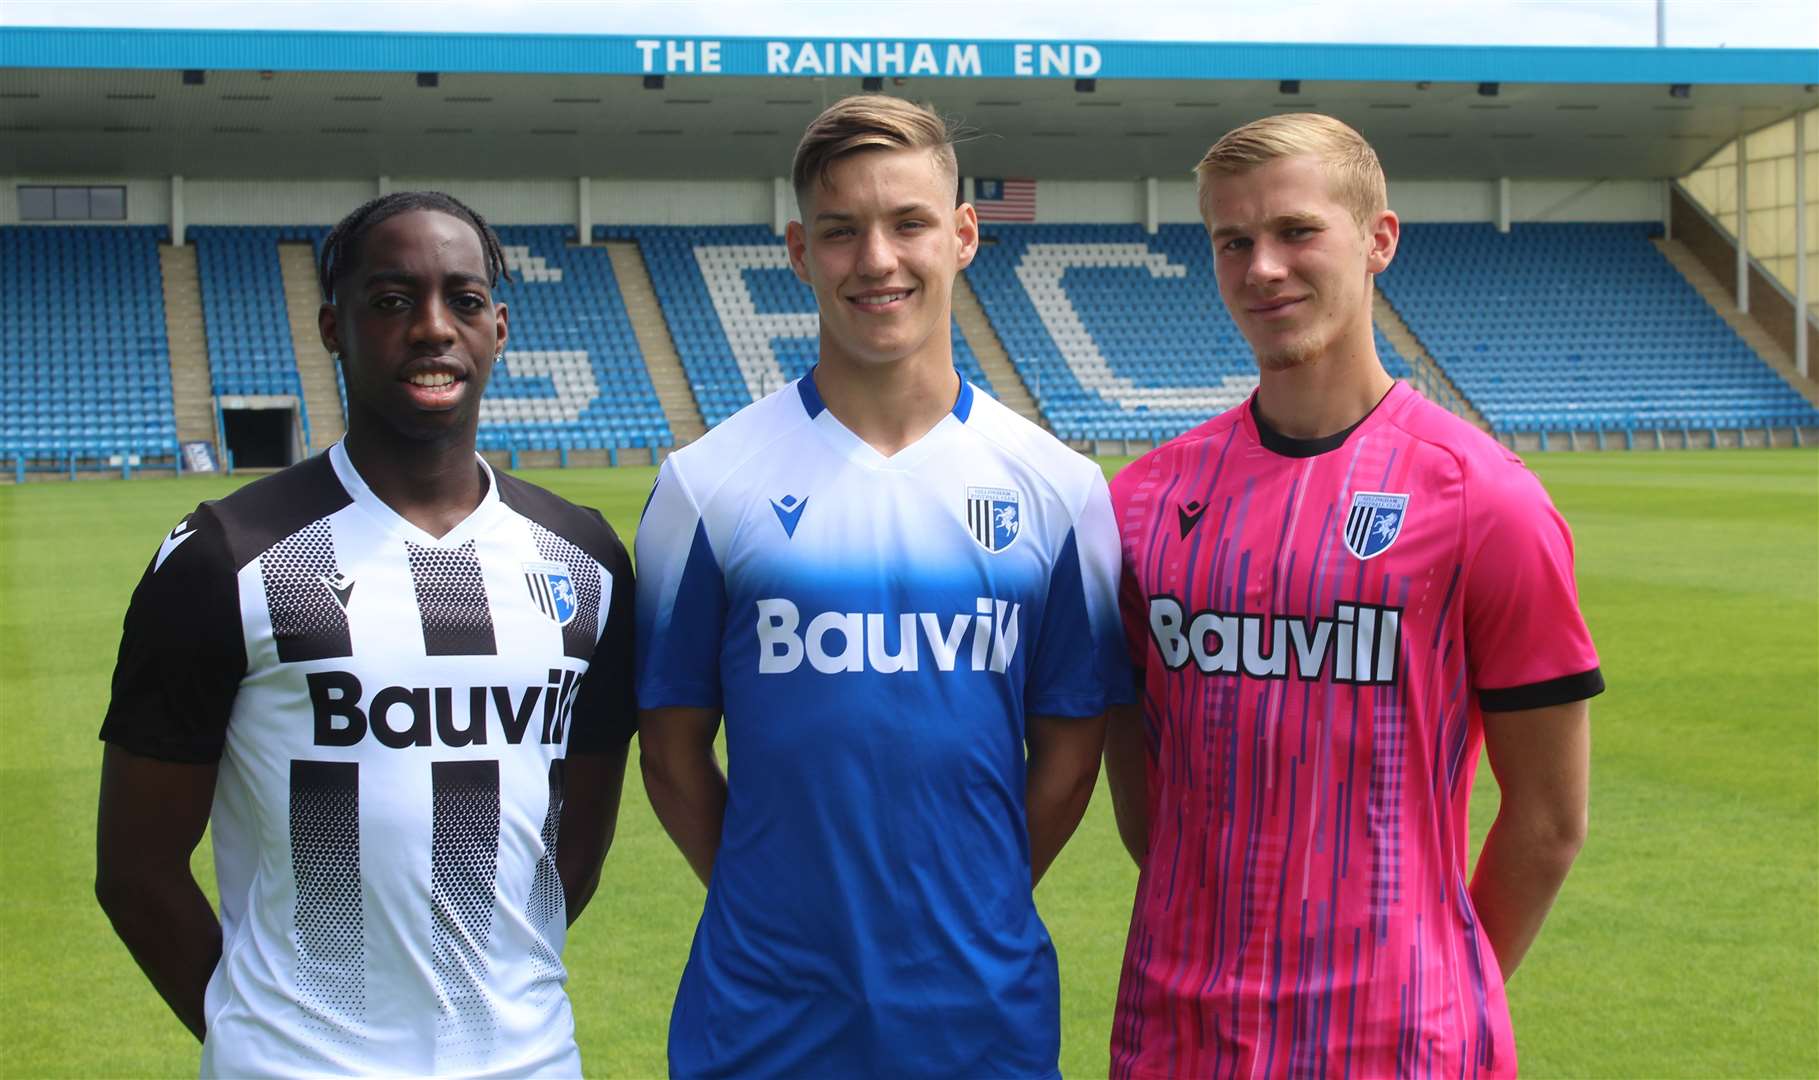 Sam Gale, Alex Giles and Ronald Sithole all sign professional contracts ...